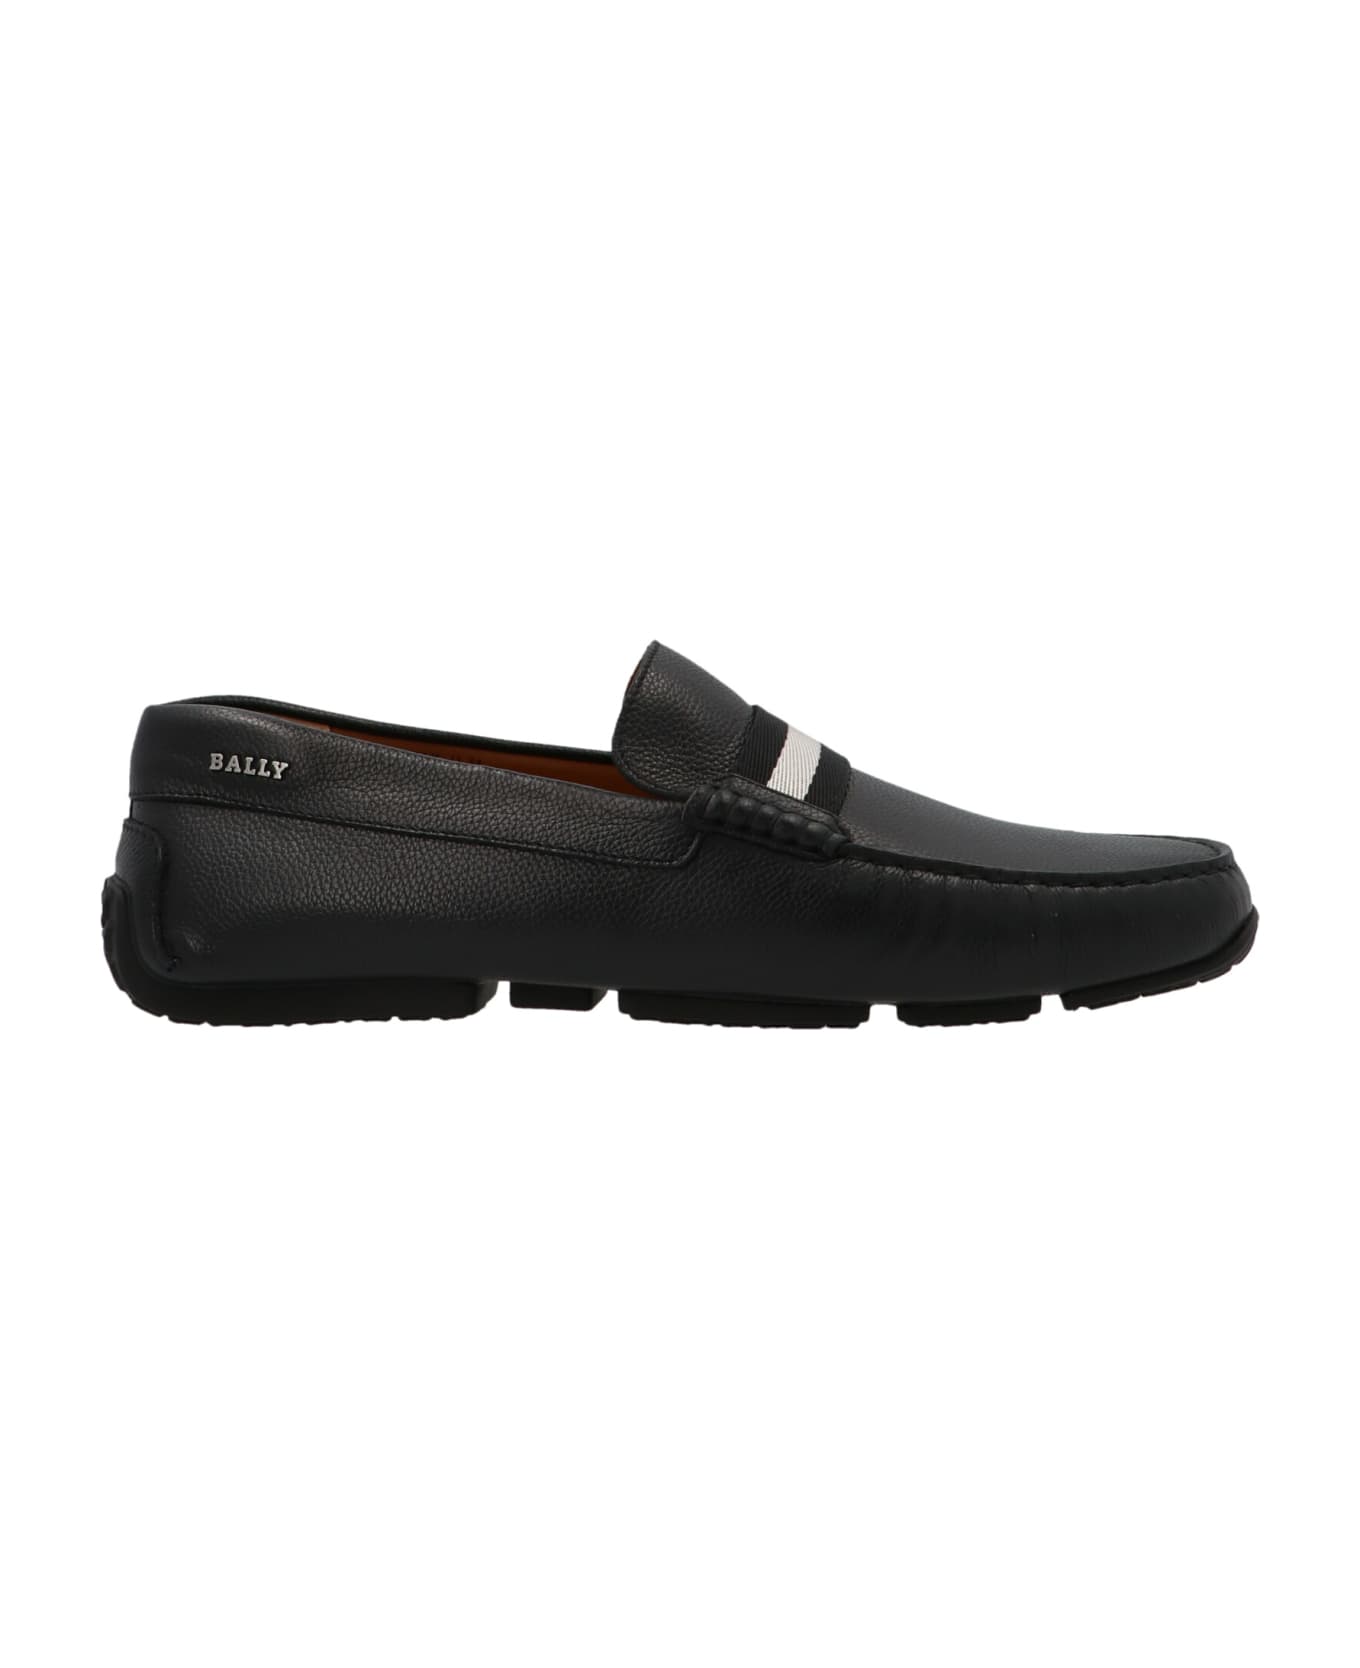 Bally 'pearce Loafers - Black